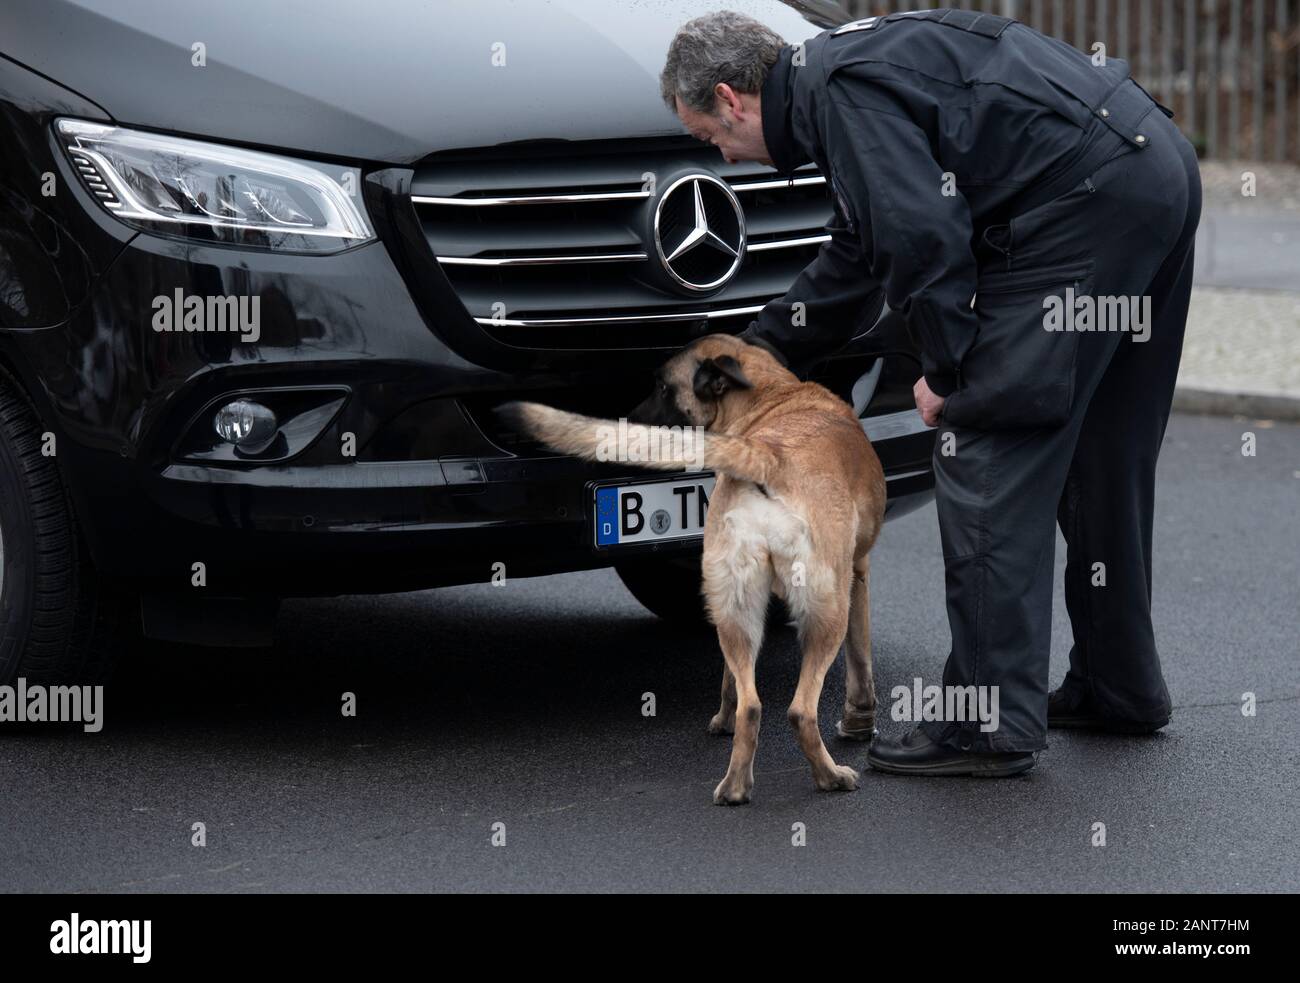 Berlin, Germany. 19th Jan, 2020. A police tracker dog is working on a car at a checkpoint. At the invitation of the German government, representatives of the Libyan parties to the conflict, Russia, the USA, France and Turkey met in Berlin to enforce the existing UN arms embargo and work towards a lasting ceasefire. Credit: Paul Zinken/dpa/Alamy Live News Stock Photo